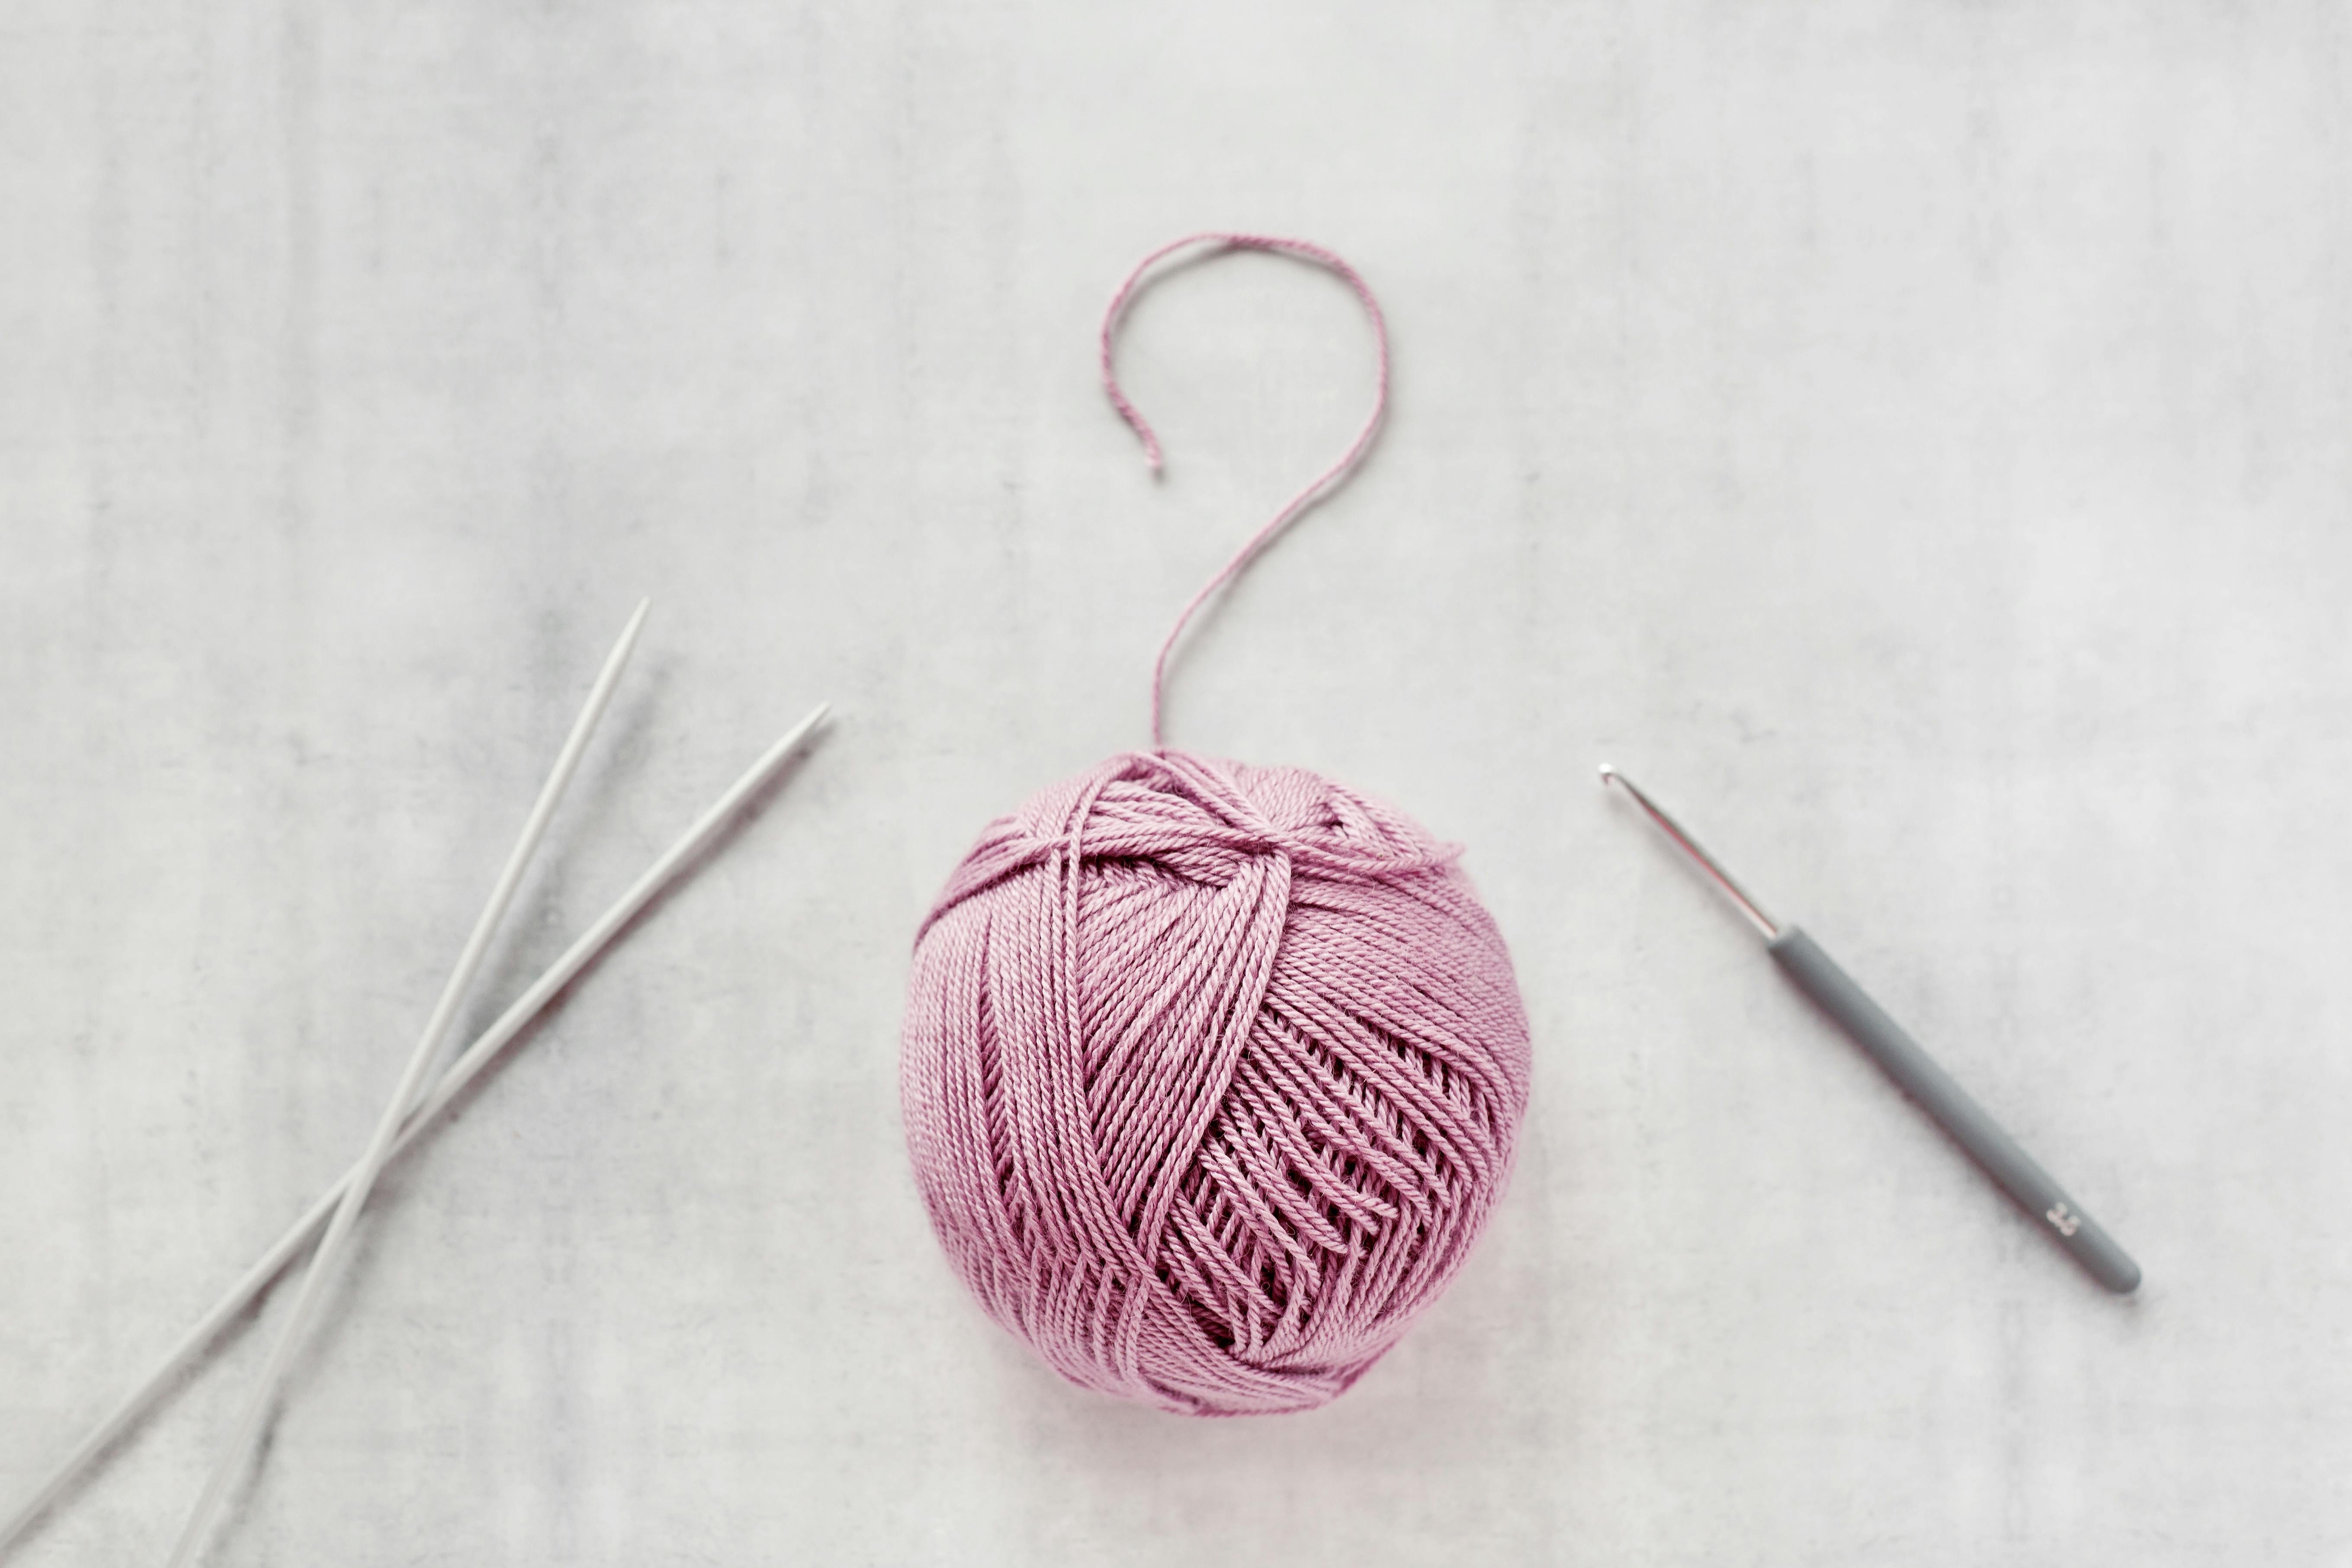 Comparing Crocheting and Knitting
